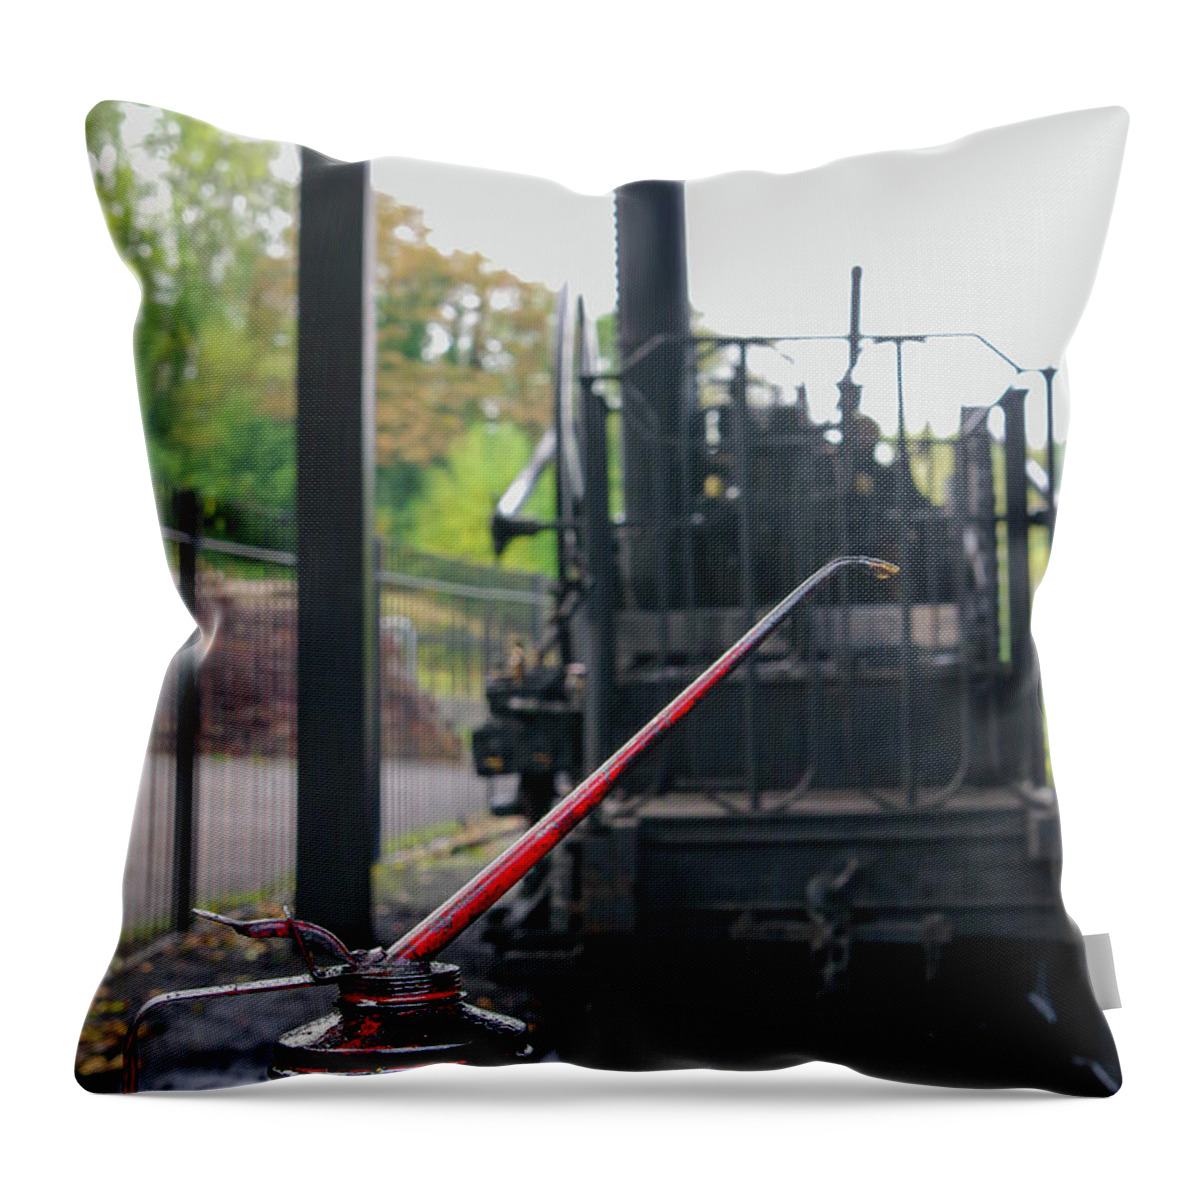 Oil Can Throw Pillow featuring the photograph Lubrication by Average Images